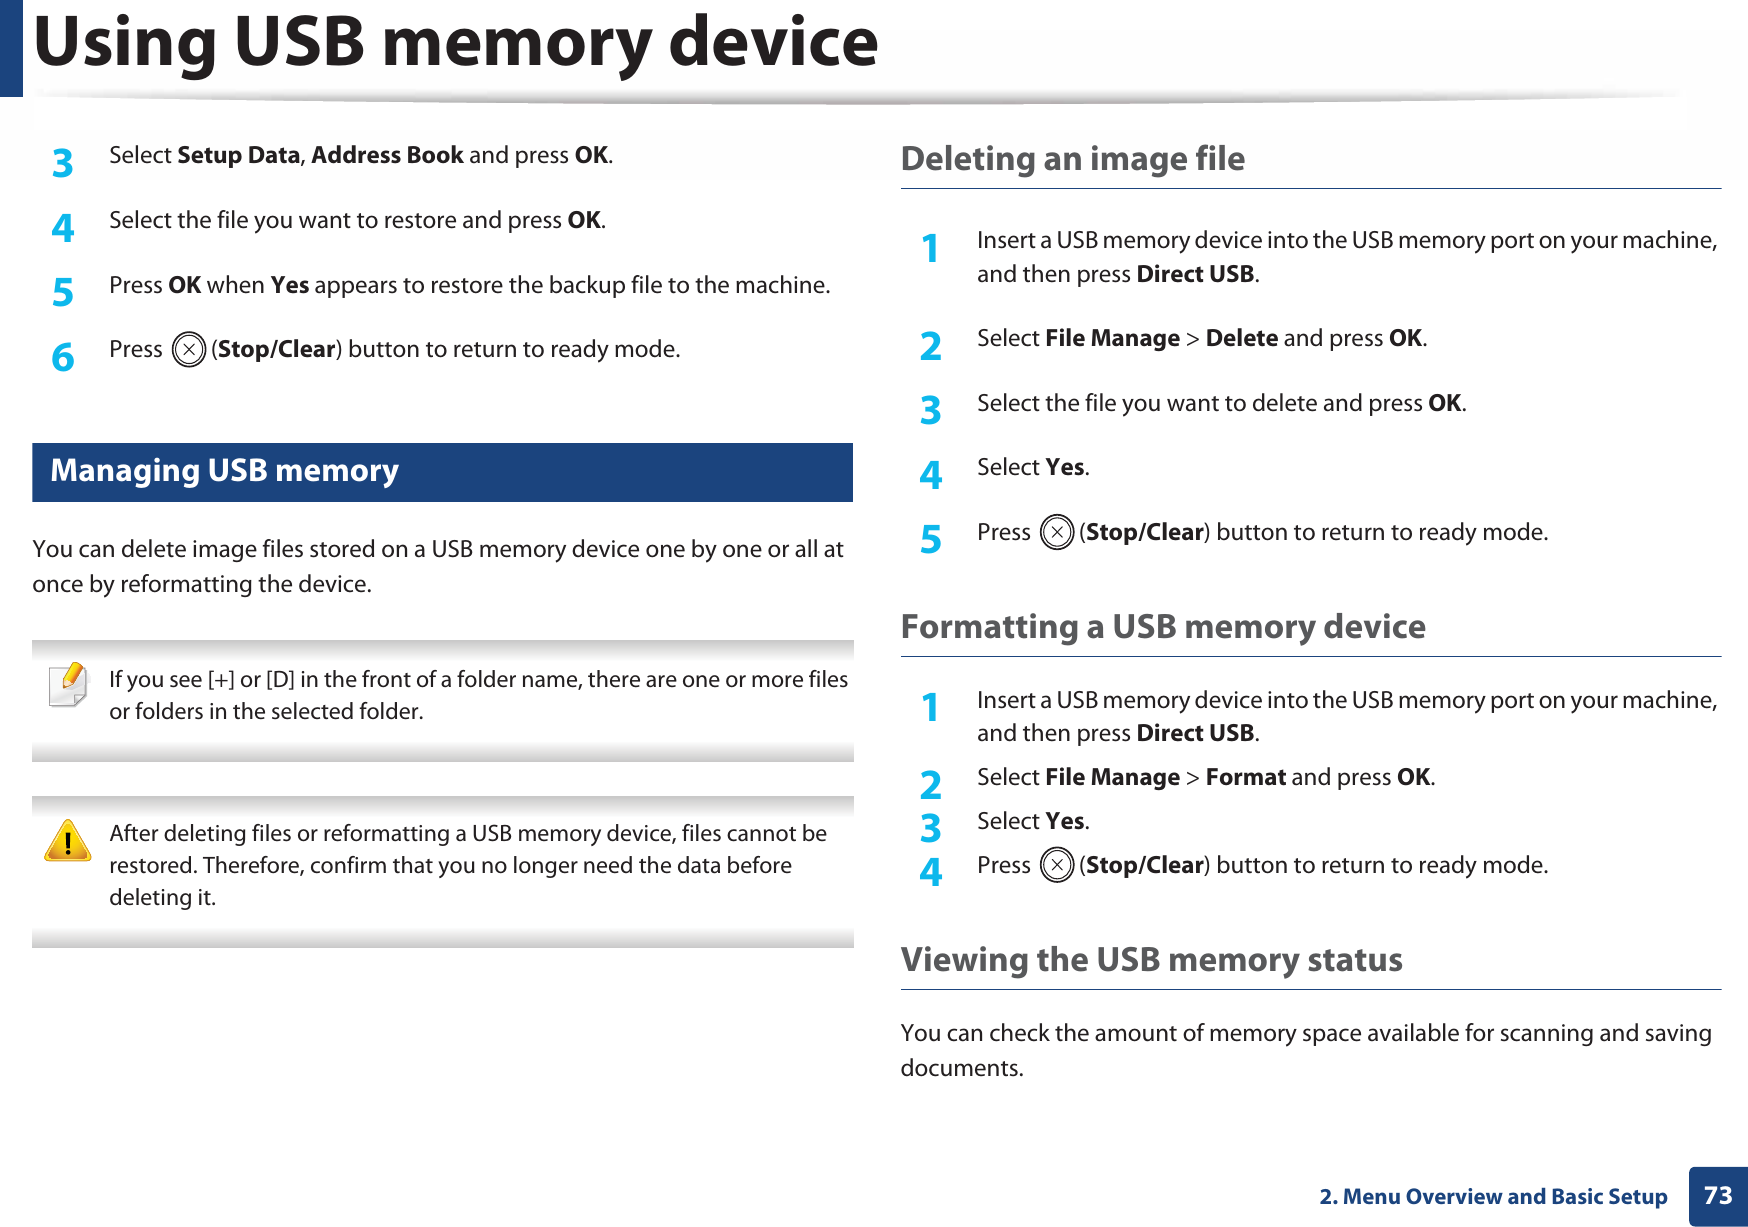 Using USB memory device732. Menu Overview and Basic Setup3  Select Setup Data, Address Book and press OK. 4  Select the file you want to restore and press OK.5  Press OK when Yes appears to restore the backup file to the machine.6  Press (Stop/Clear) button to return to ready mode.28 Managing USB memoryYou can delete image files stored on a USB memory device one by one or all at once by reformatting the device. If you see [+] or [D] in the front of a folder name, there are one or more files or folders in the selected folder.  After deleting files or reformatting a USB memory device, files cannot be restored. Therefore, confirm that you no longer need the data before deleting it. Deleting an image file1Insert a USB memory device into the USB memory port on your machine, and then press Direct USB.2  Select File Manage &gt; Delete and press OK.3  Select the file you want to delete and press OK.4  Select Yes.5  Press (Stop/Clear) button to return to ready mode.Formatting a USB memory device1Insert a USB memory device into the USB memory port on your machine, and then press Direct USB.2  Select File Manage &gt; Format and press OK.3  Select Yes.4  Press (Stop/Clear) button to return to ready mode.Viewing the USB memory statusYou can check the amount of memory space available for scanning and saving documents.